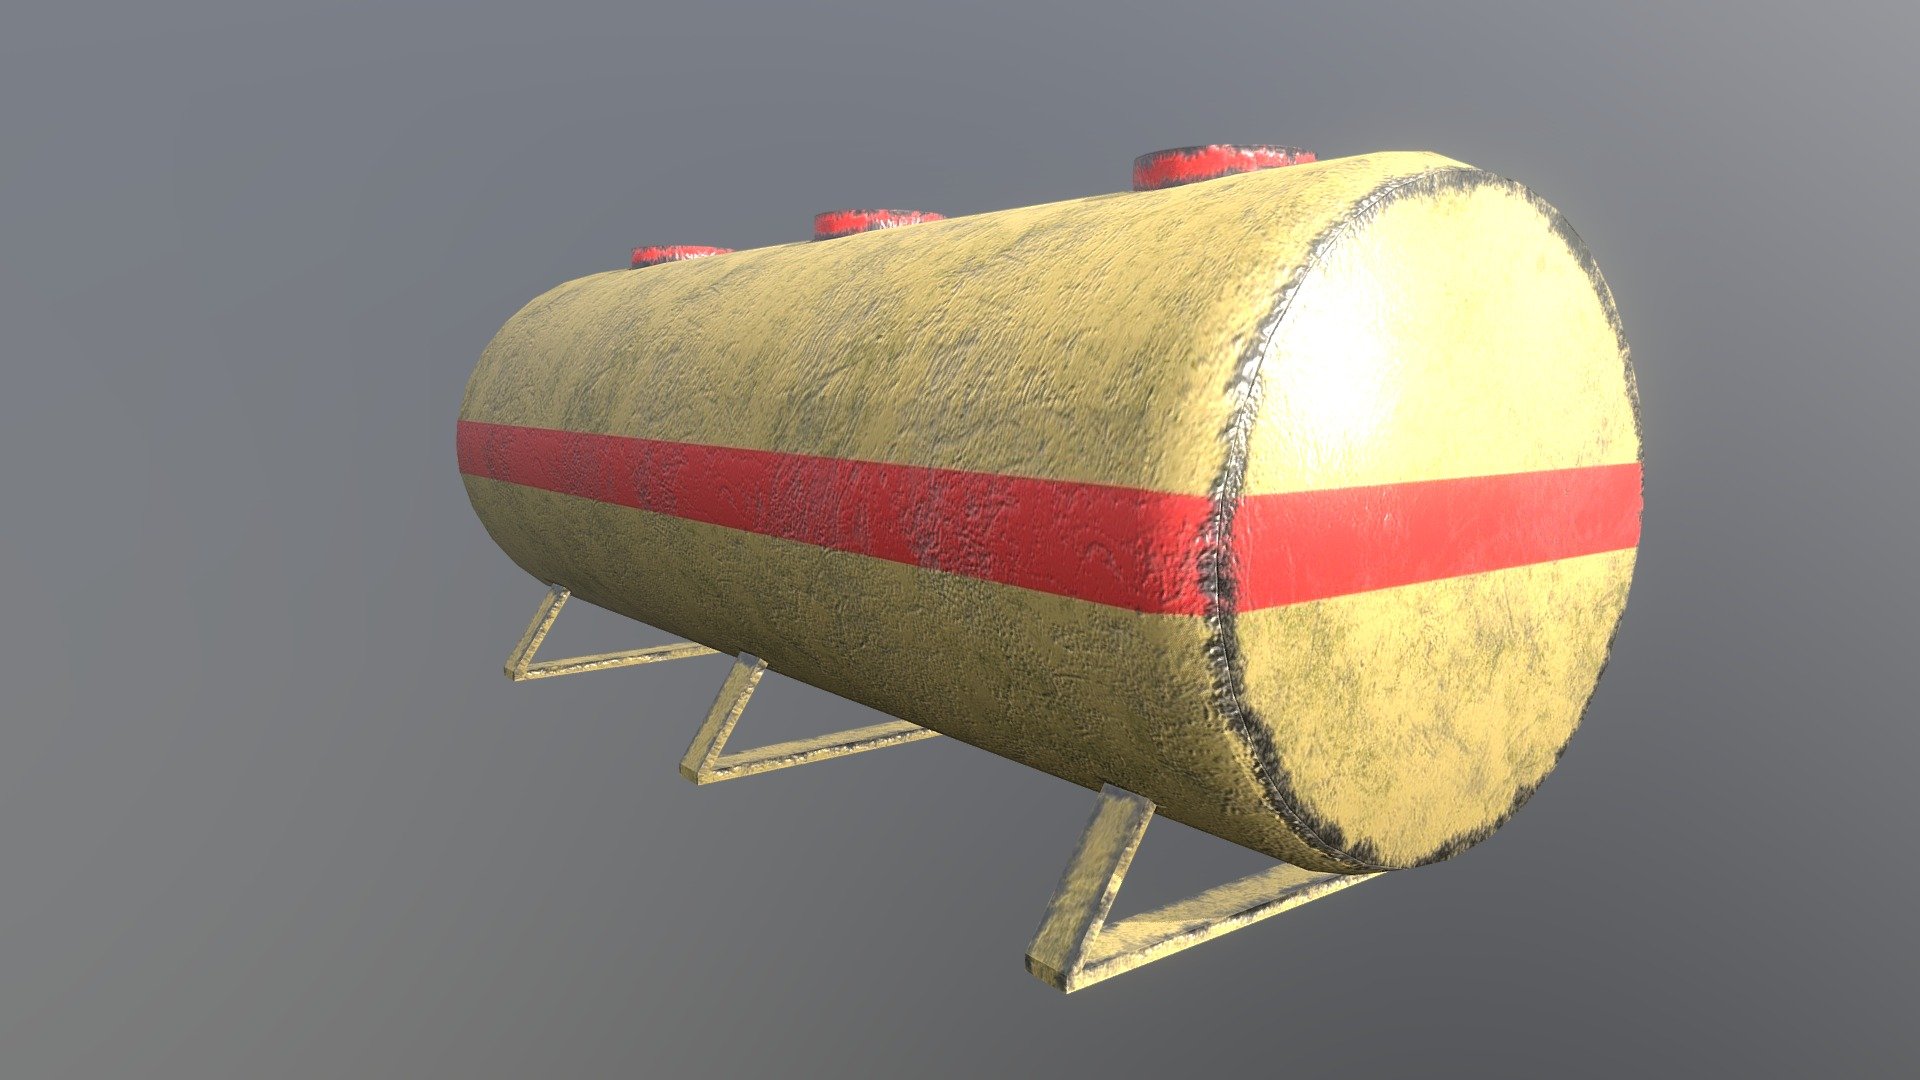 Template created with Blender 3D and textured with Substance Painter.
The fuel tank has three bottom support and also three upper openings 3d model